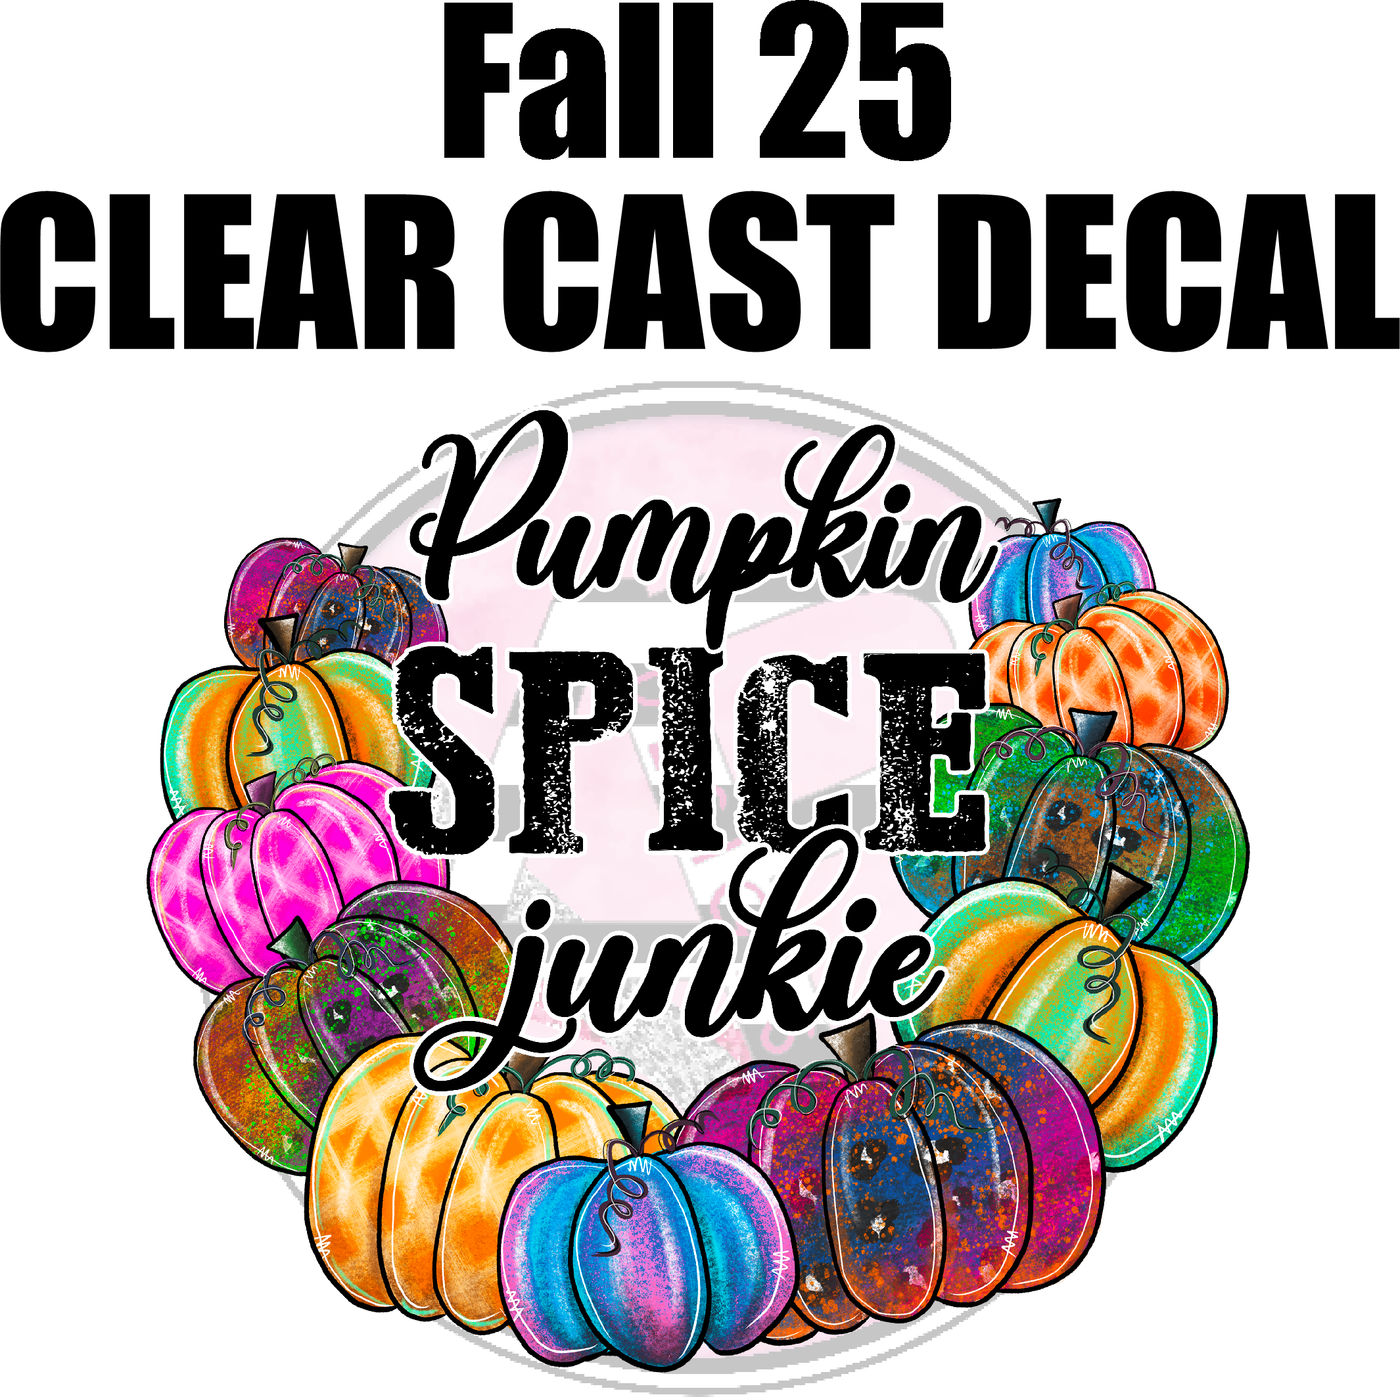 Fall 25 - Clear Cast Decal